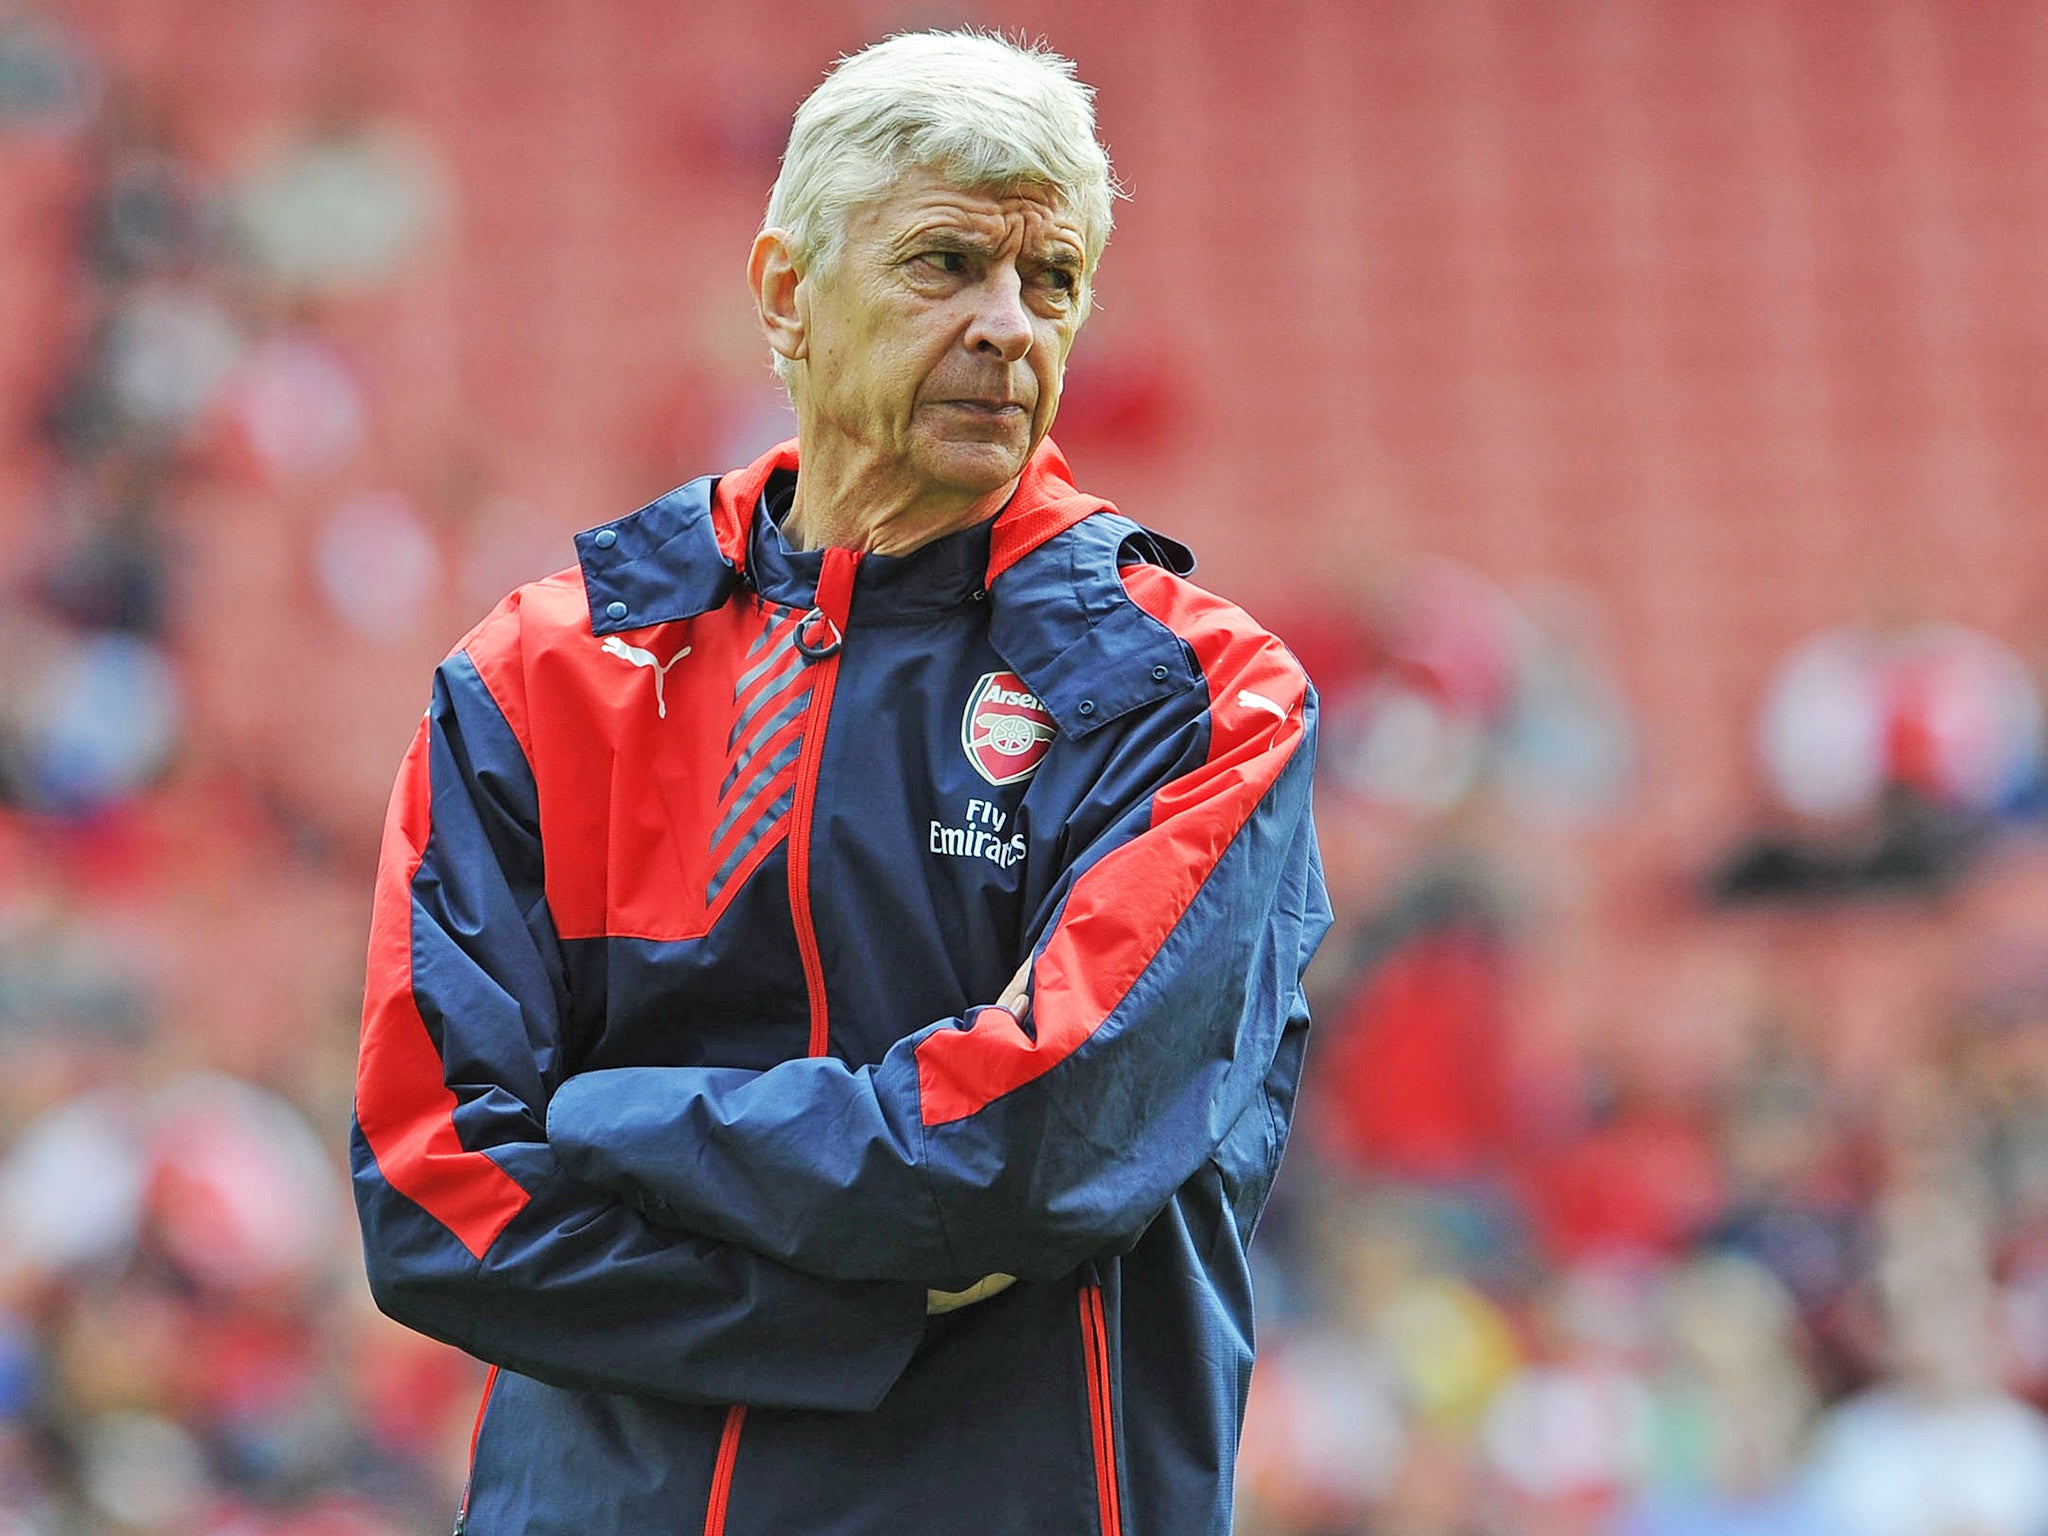 Arsène Wenger says he does not listen too much to others